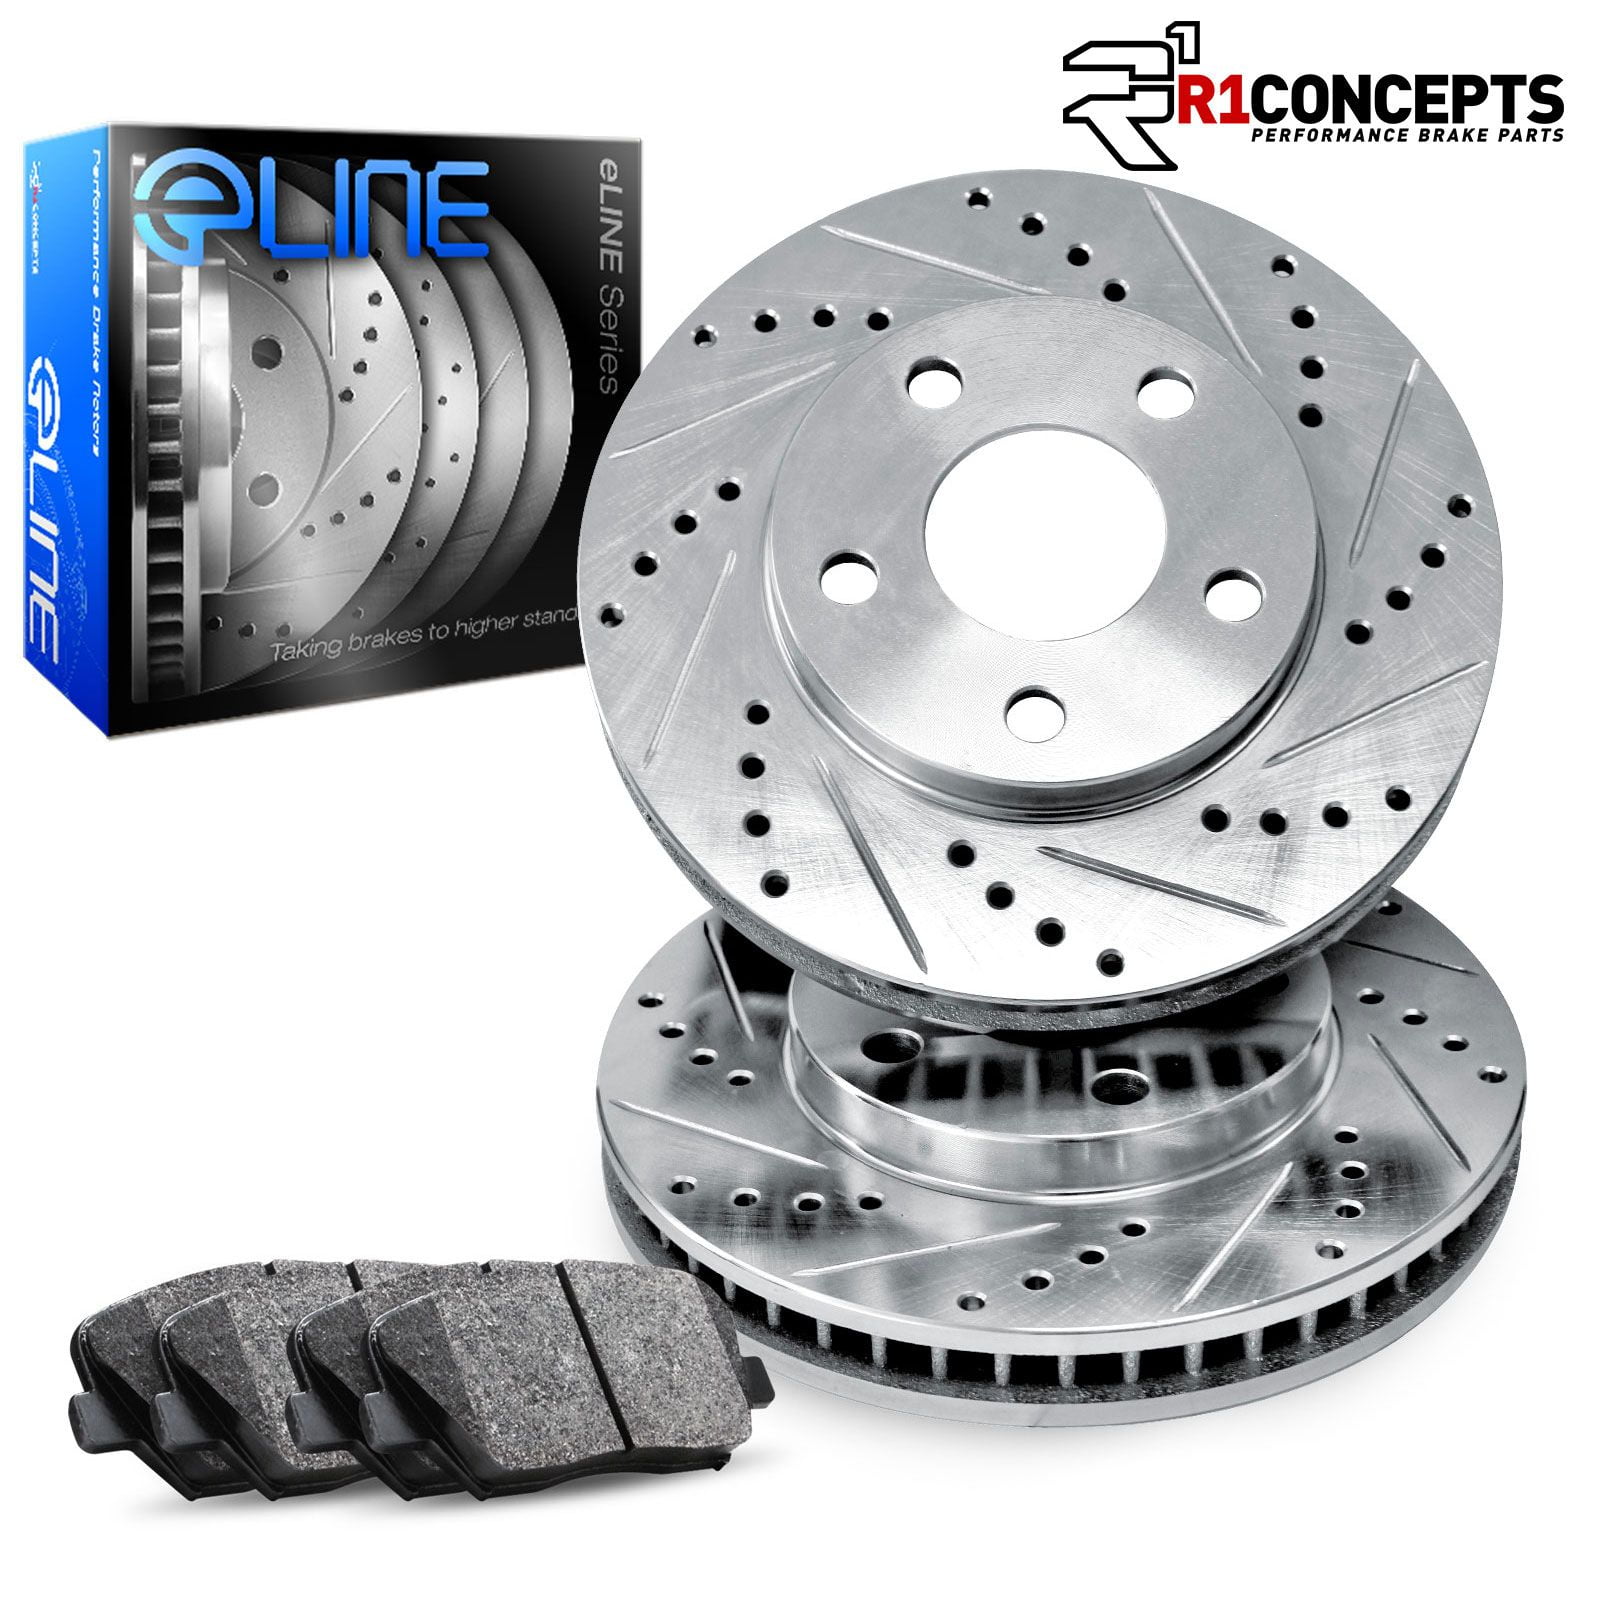 REAR E-Coated Drilled Brake Rotors & Ceramic Pads for 2013 2014-17 CAMRY AVALON